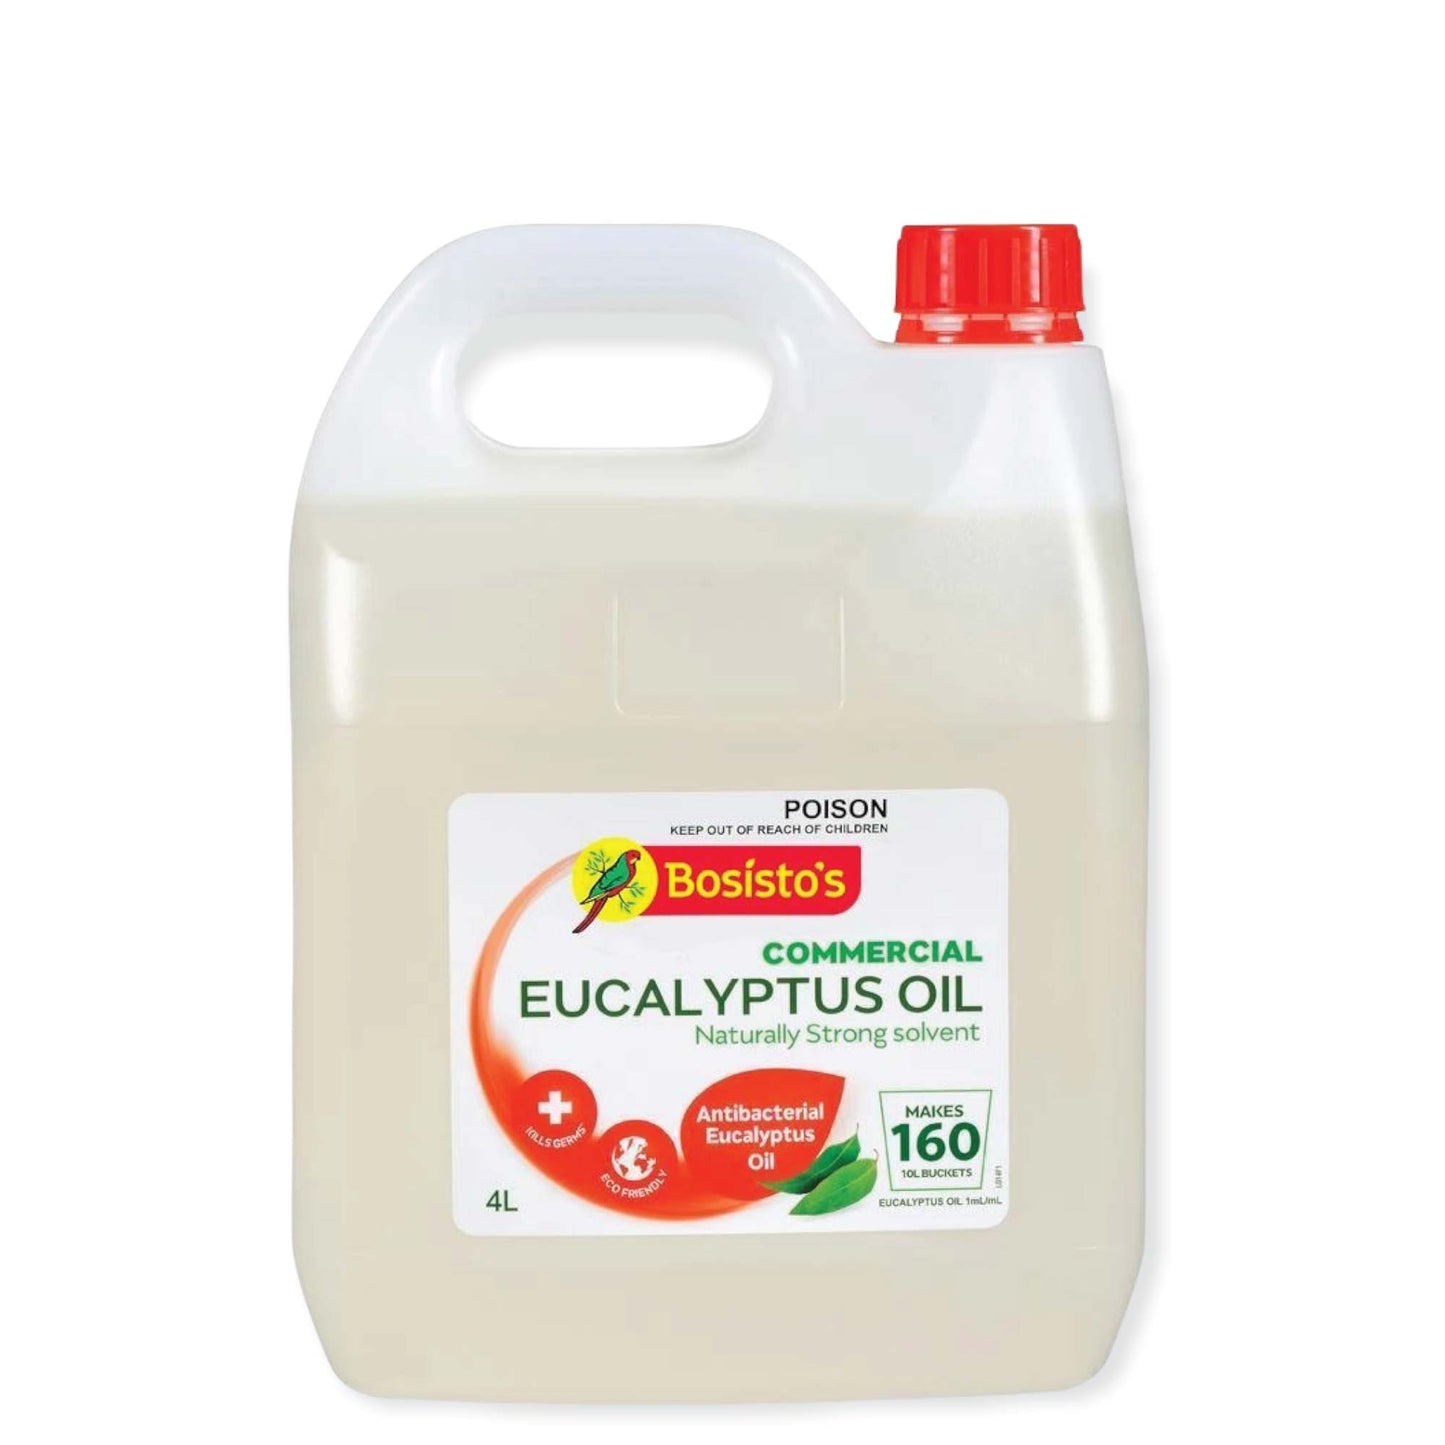 Natural Eucalyptus Oil 4L Commercial Cleaner I  Bosisto's - Dust Mite Allergy Solutions